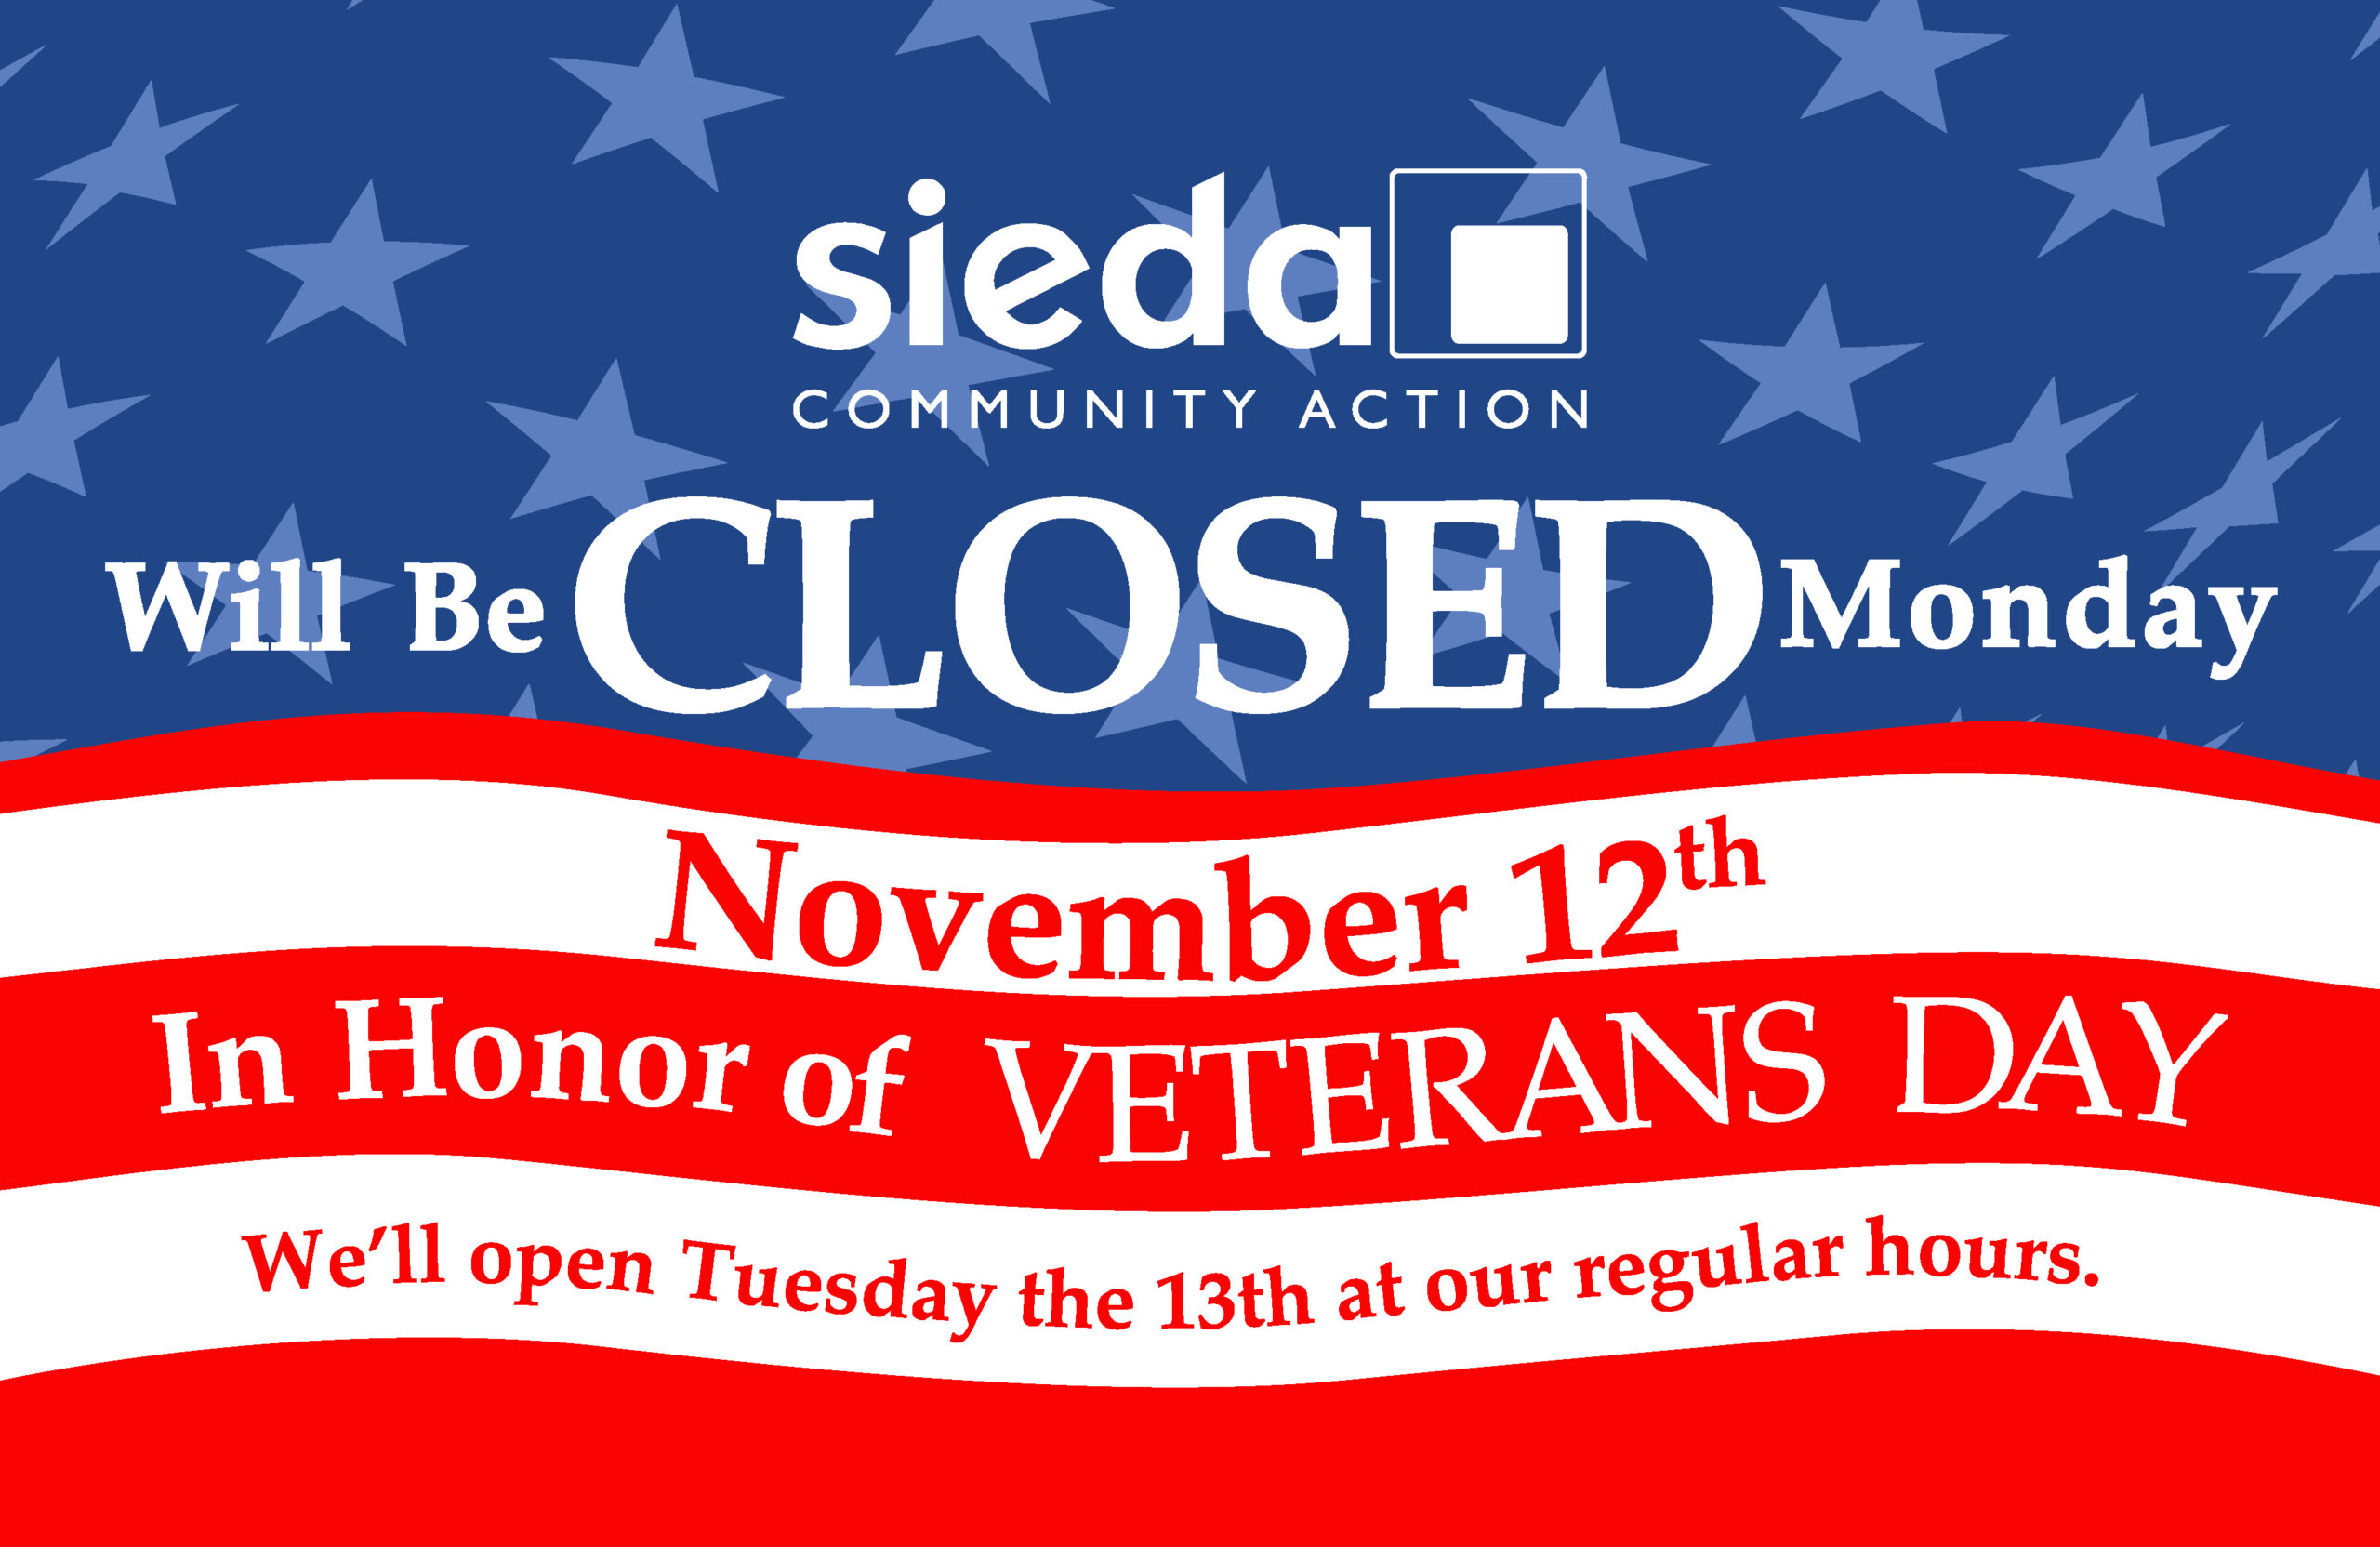 Veterans Day Closed Signs Printable 2022